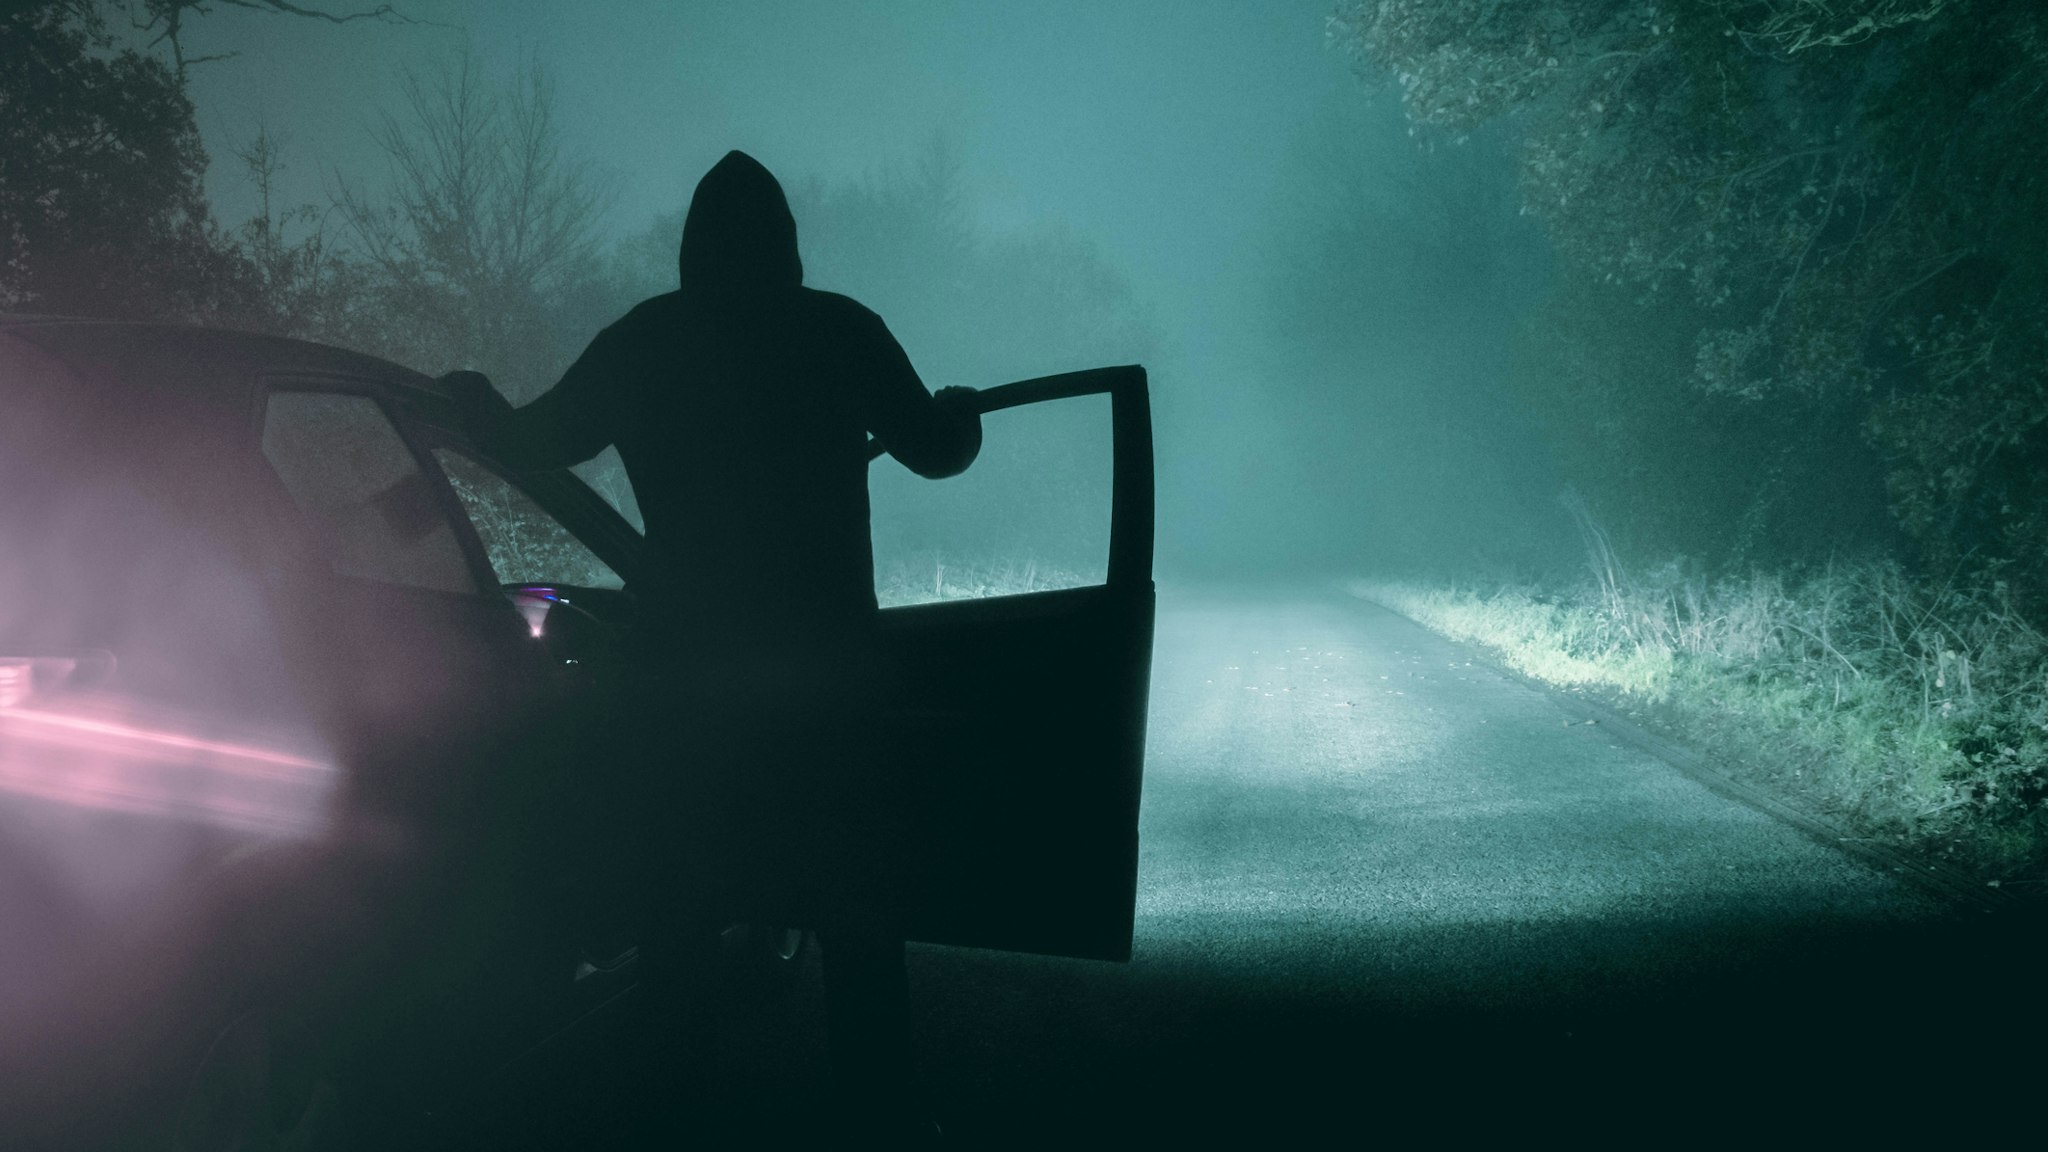 A lone, hooded figure standing next to a car looking at an empty misty winter country road silhouetted at night by car headlights - stock photo